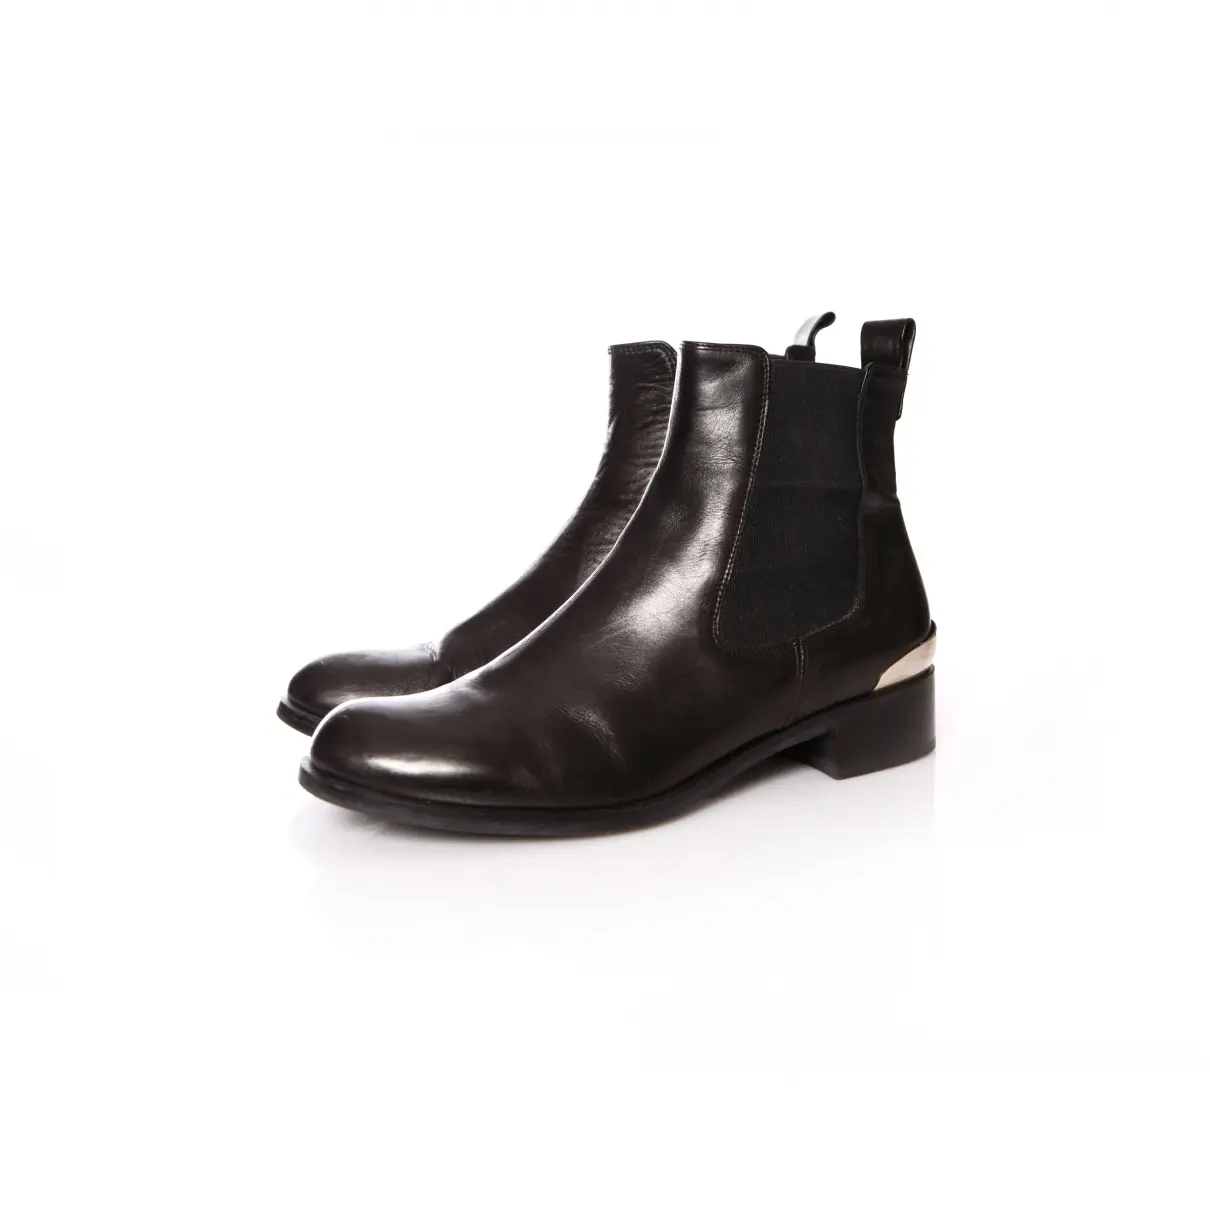 Russell & Bromley Leather ankle boots for sale